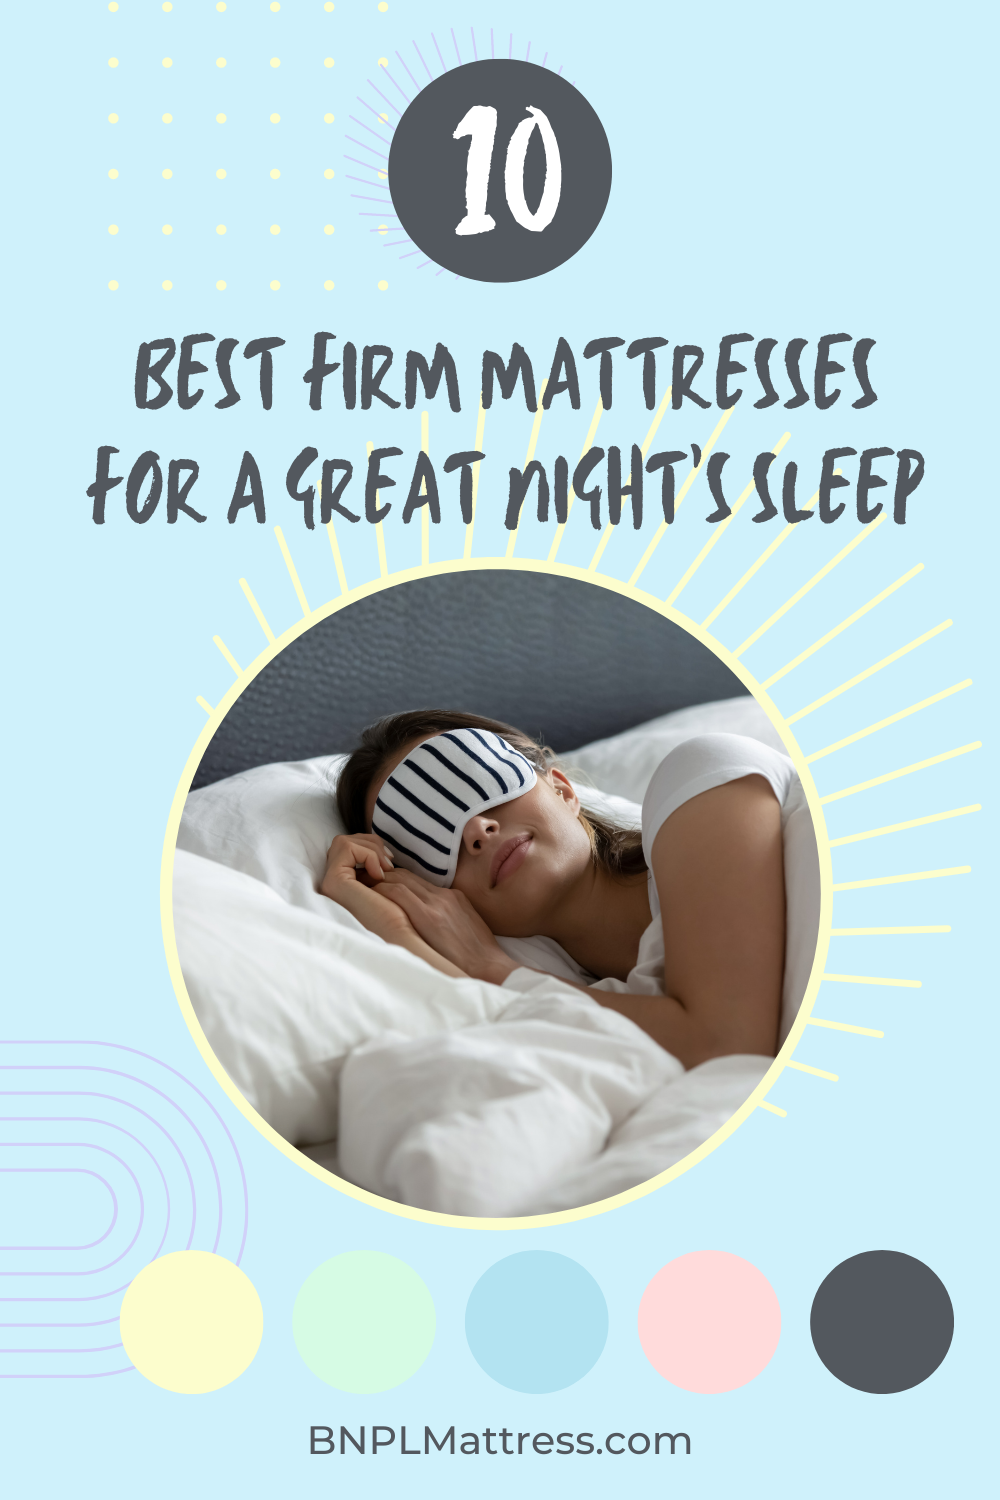 Best Firm Mattresses for a Great Night's Sleep